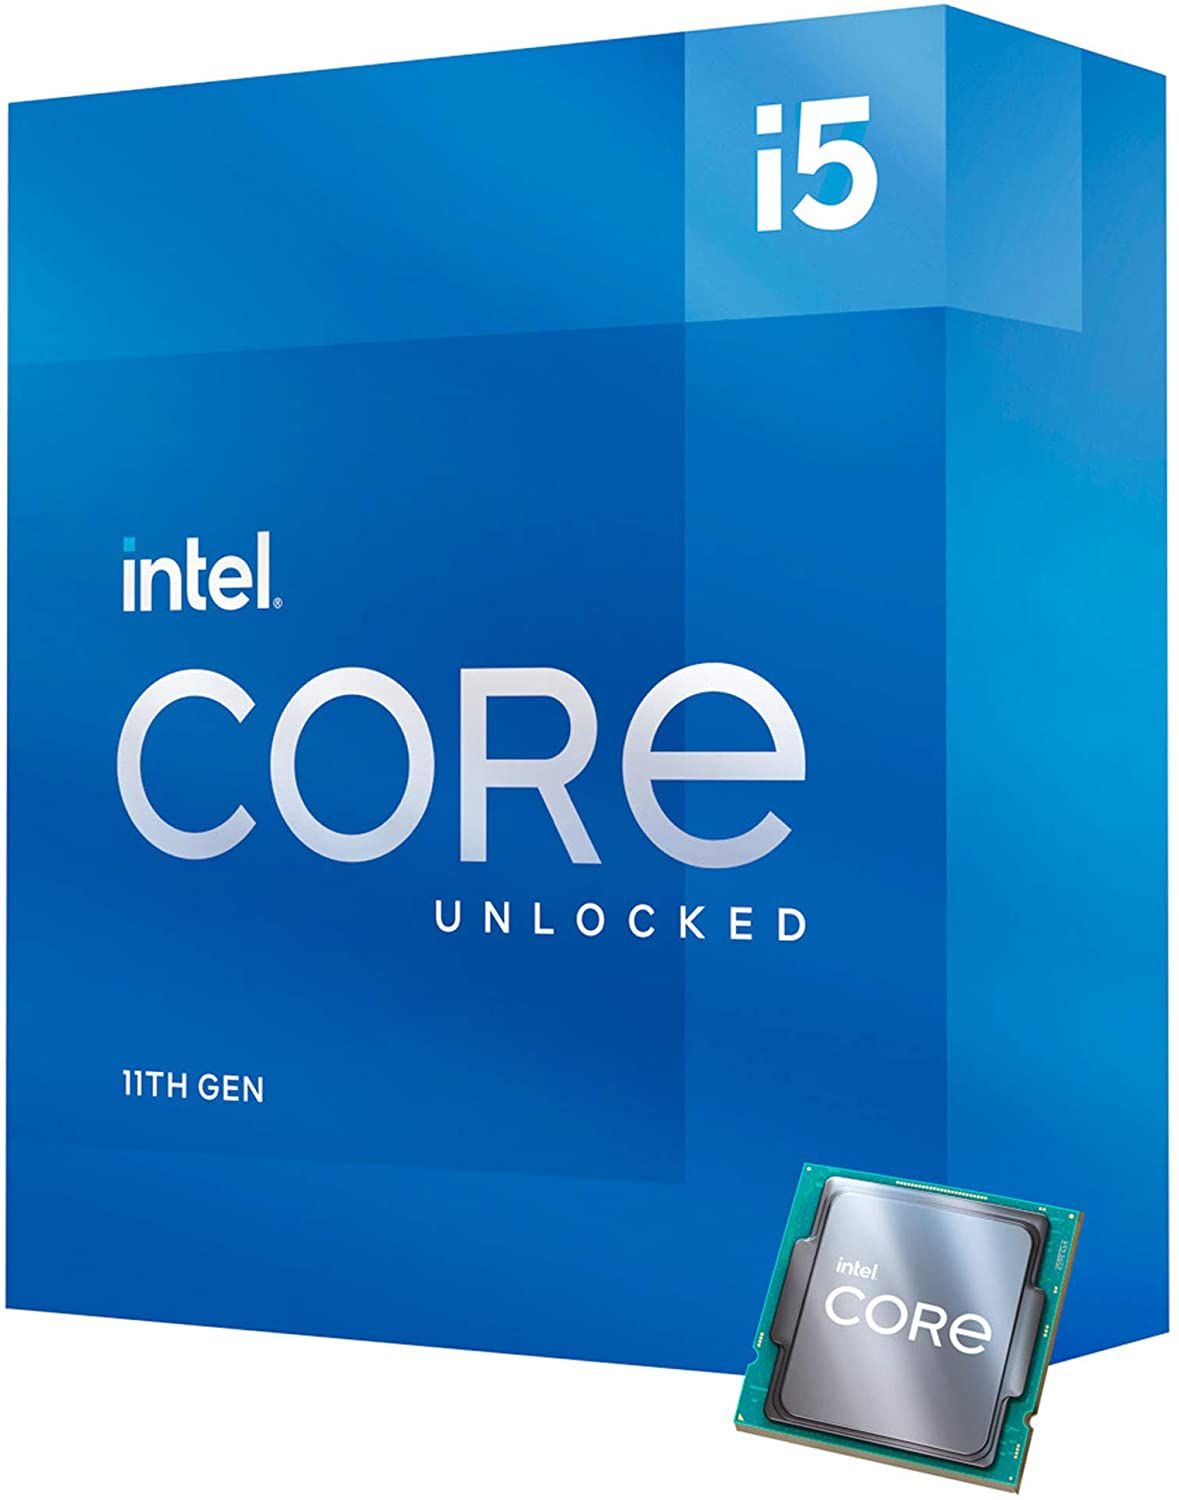 Intel Core i5-11600K with chip